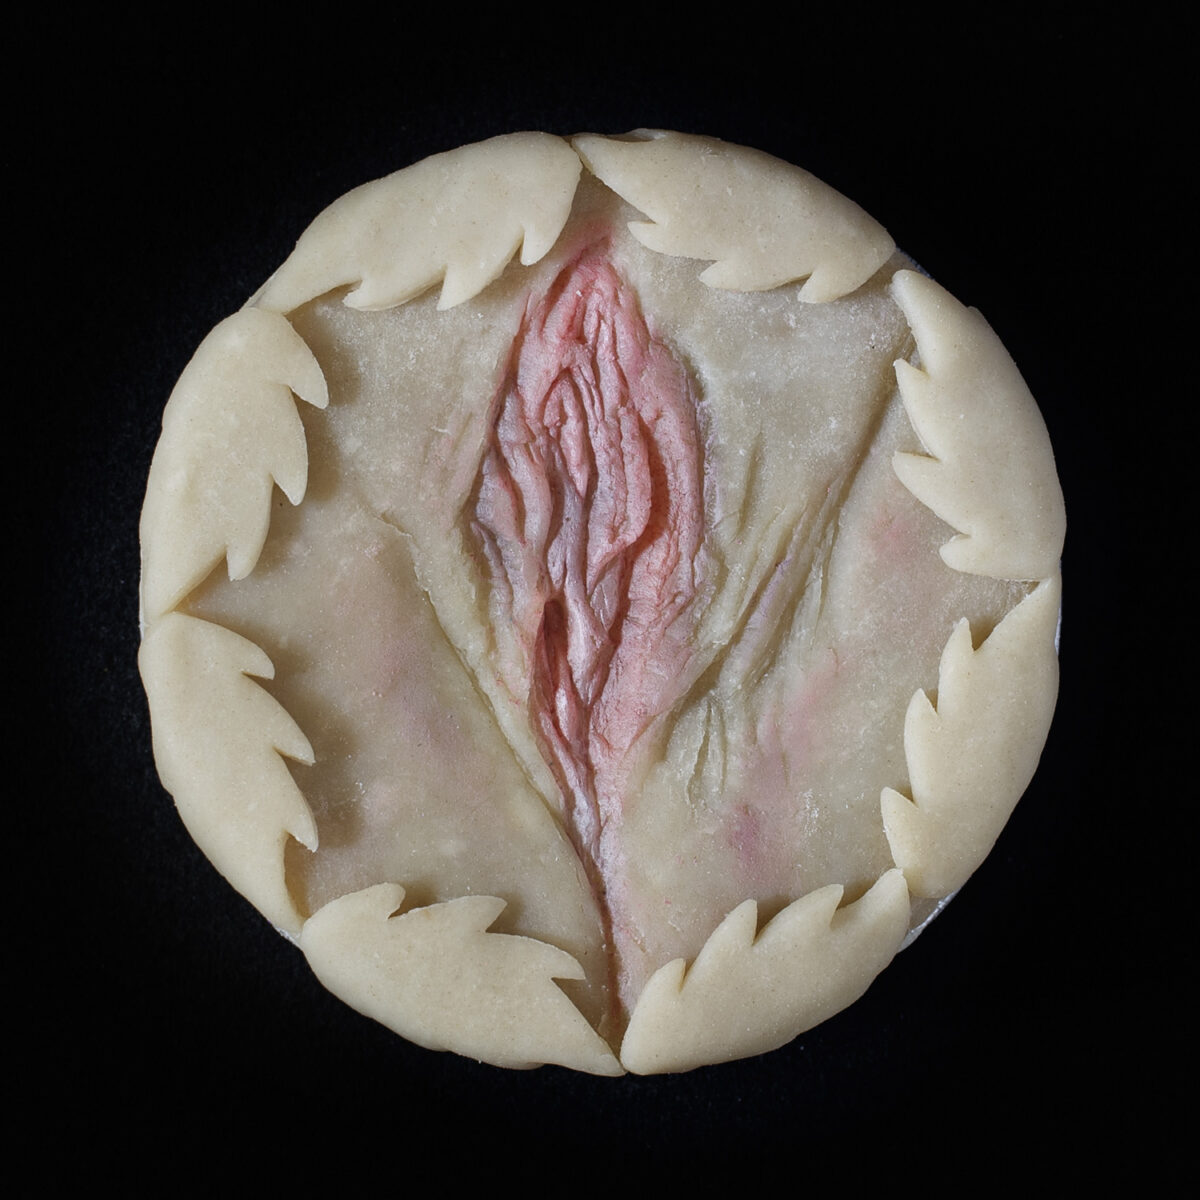 Hand sculpted and hand painted vulva art on a real cherry pie on a black background